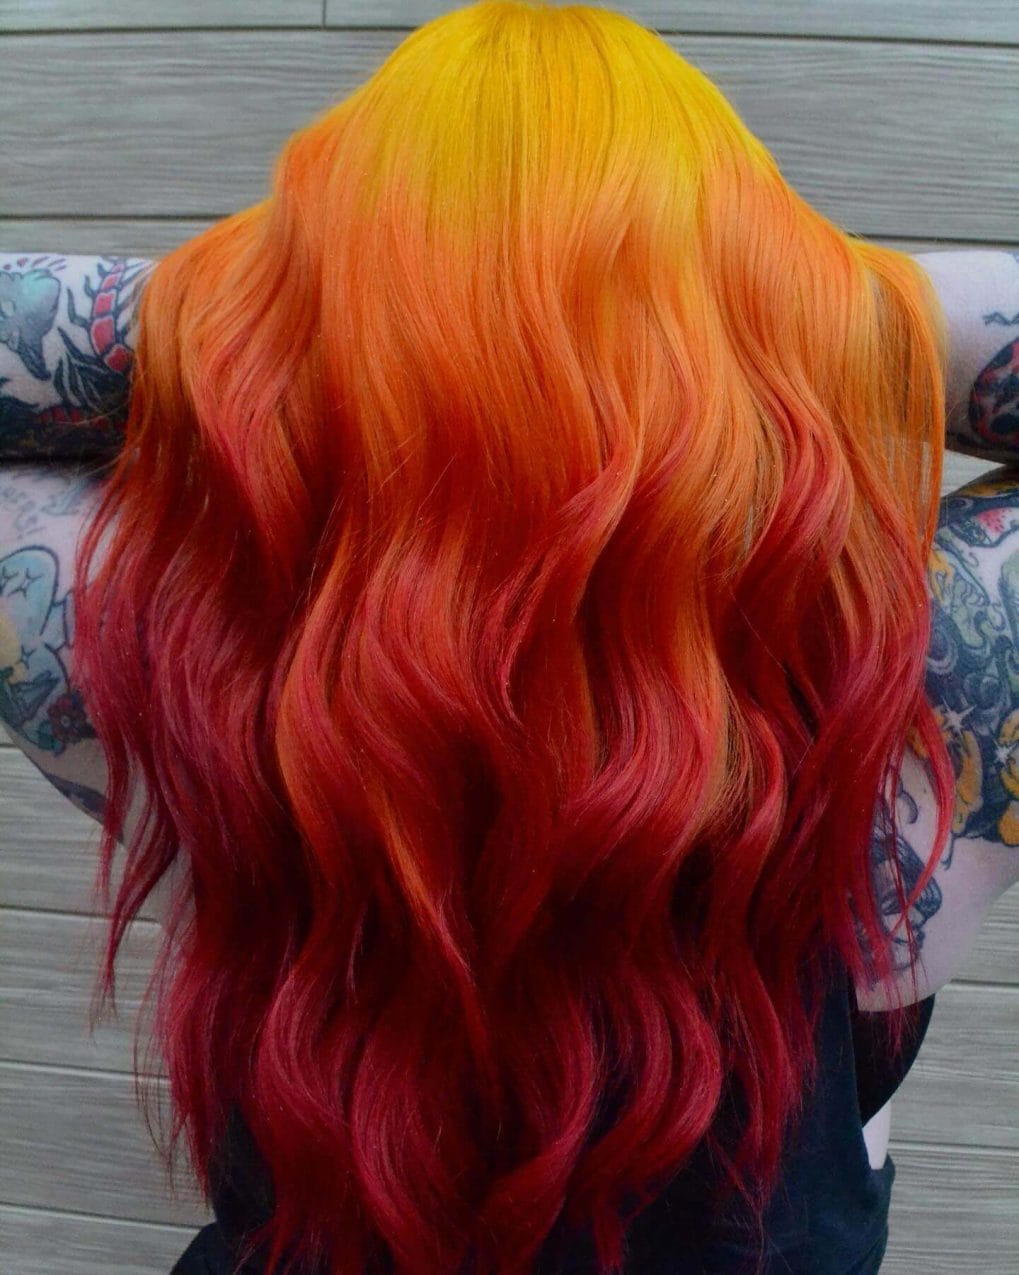 Bright yellow to bold red straight hair mimicking a summer sunset